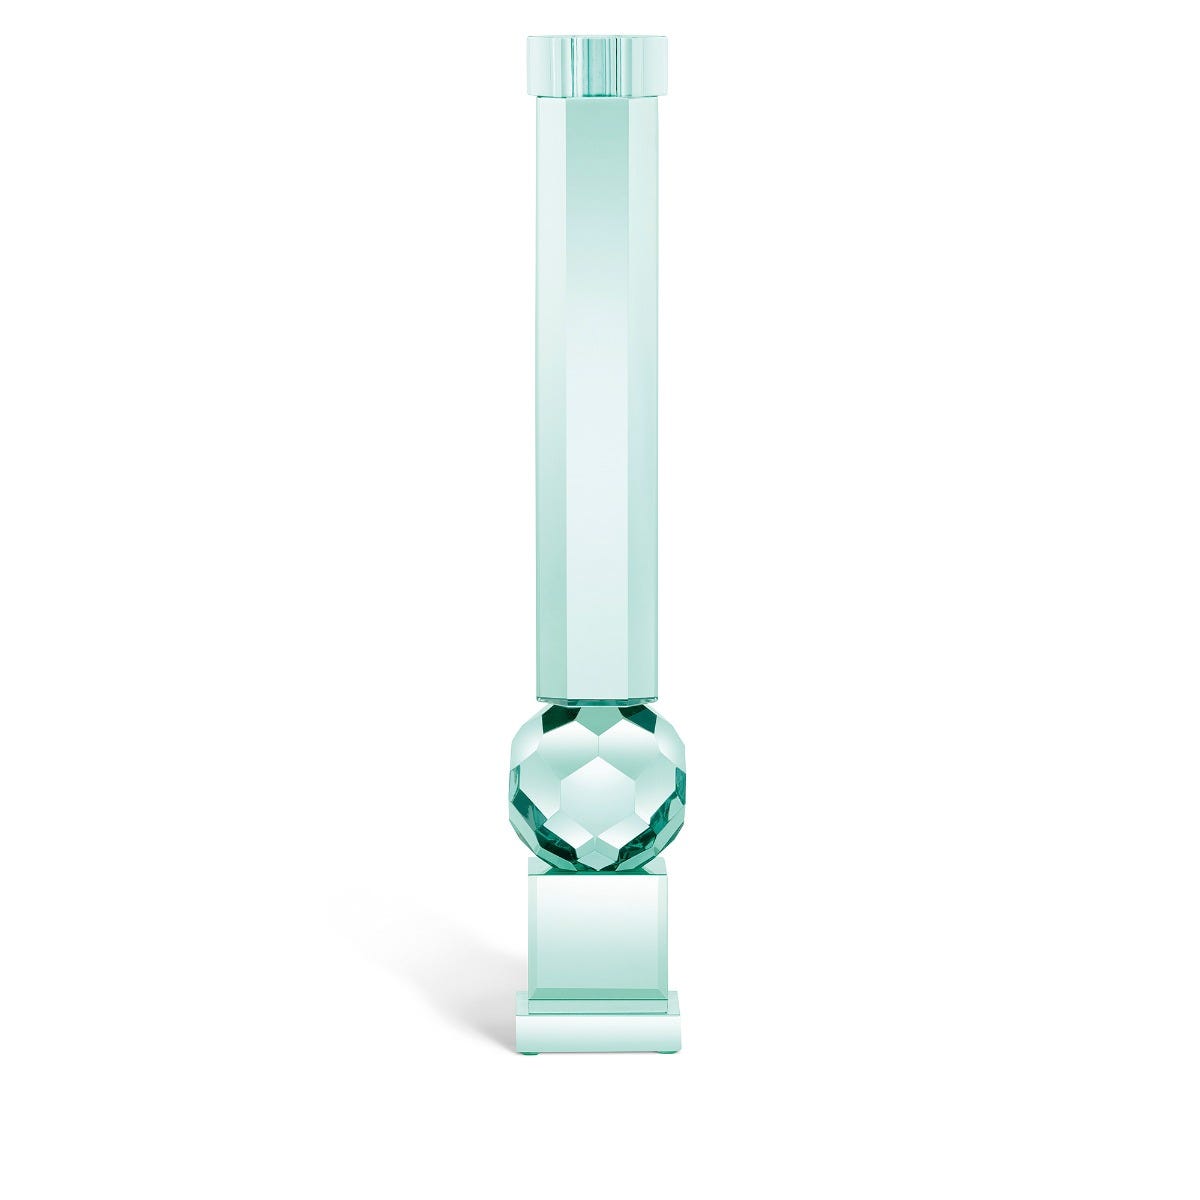 Prism Tall Candlestick